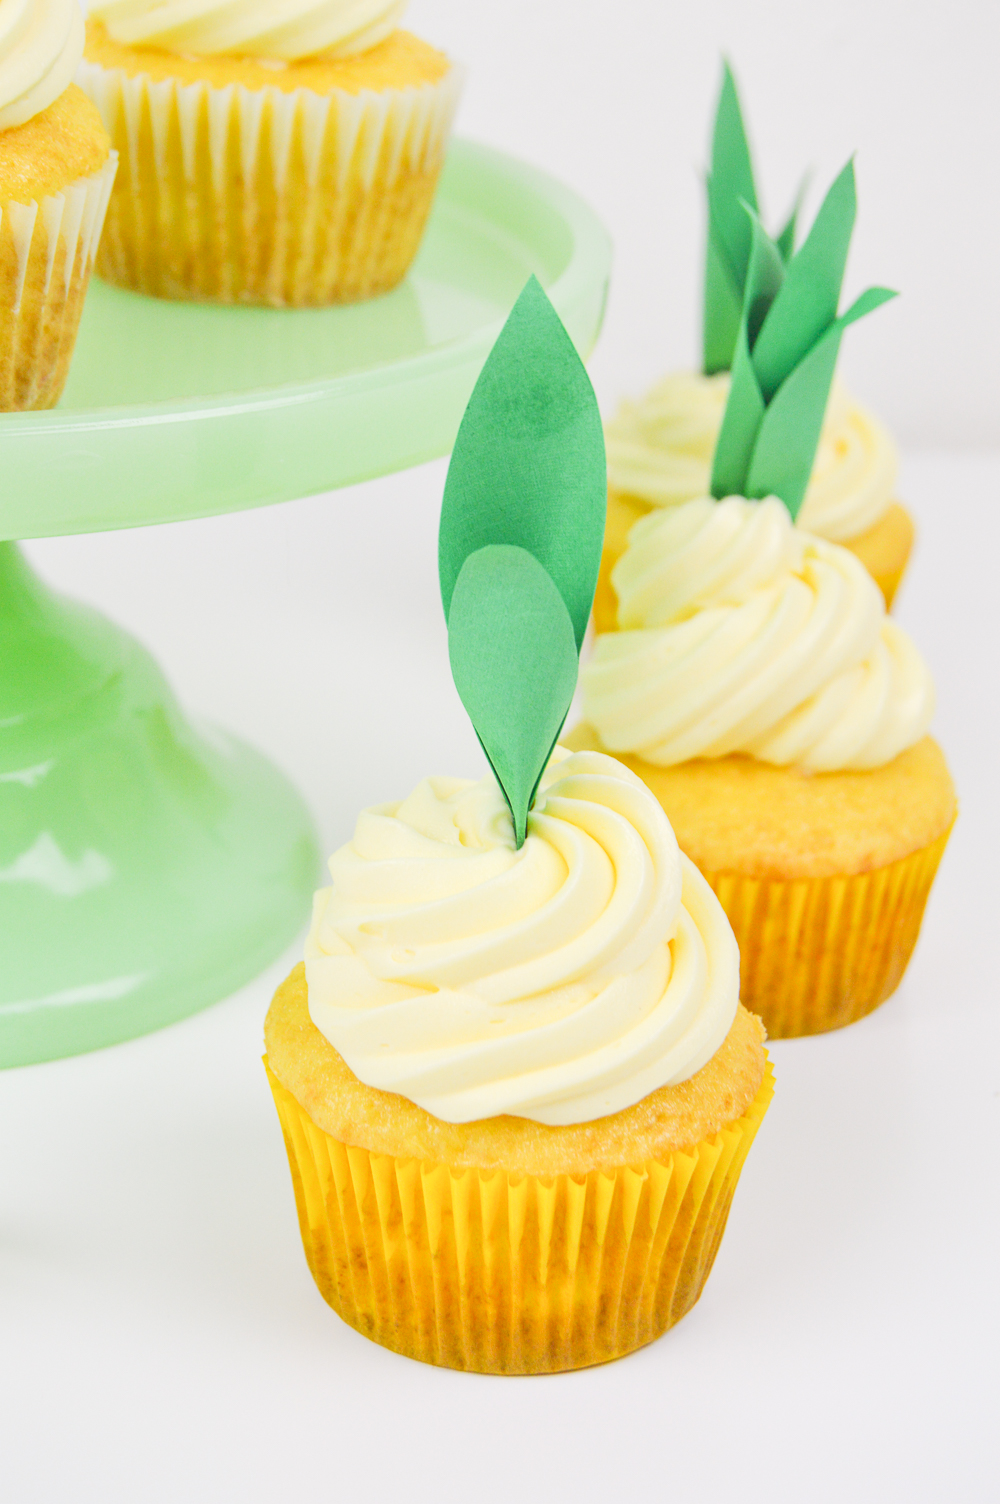 Pineapple Cupcake Recipe and DIY Pineapple Cupcake Toppers | www.clubcrafted.com